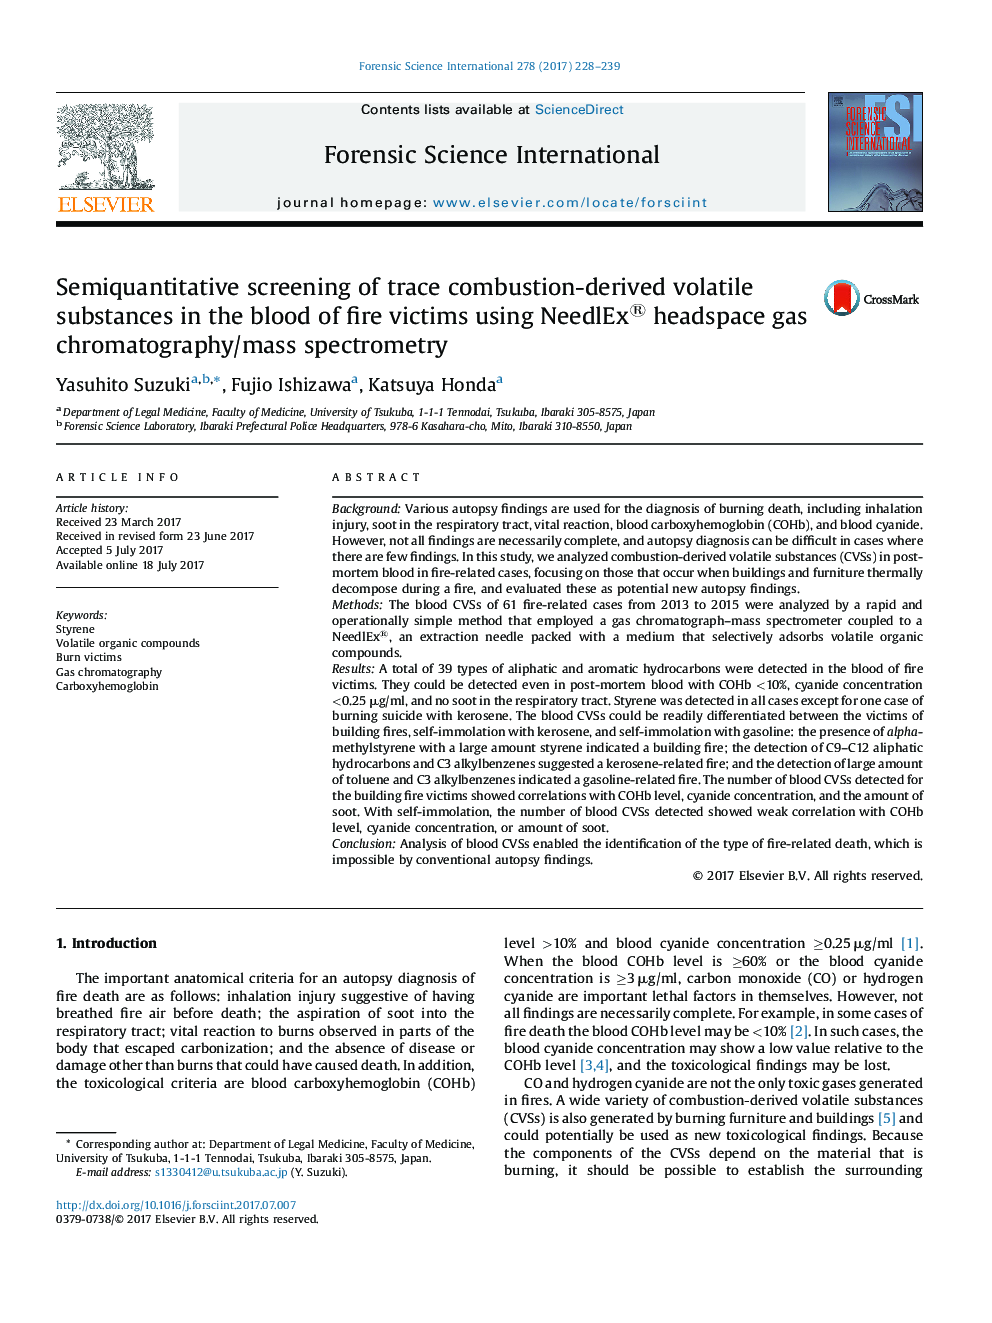 Semiquantitative screening of trace combustion-derived volatile substances in the blood of fire victims using NeedlEx® headspace gas chromatography/mass spectrometry